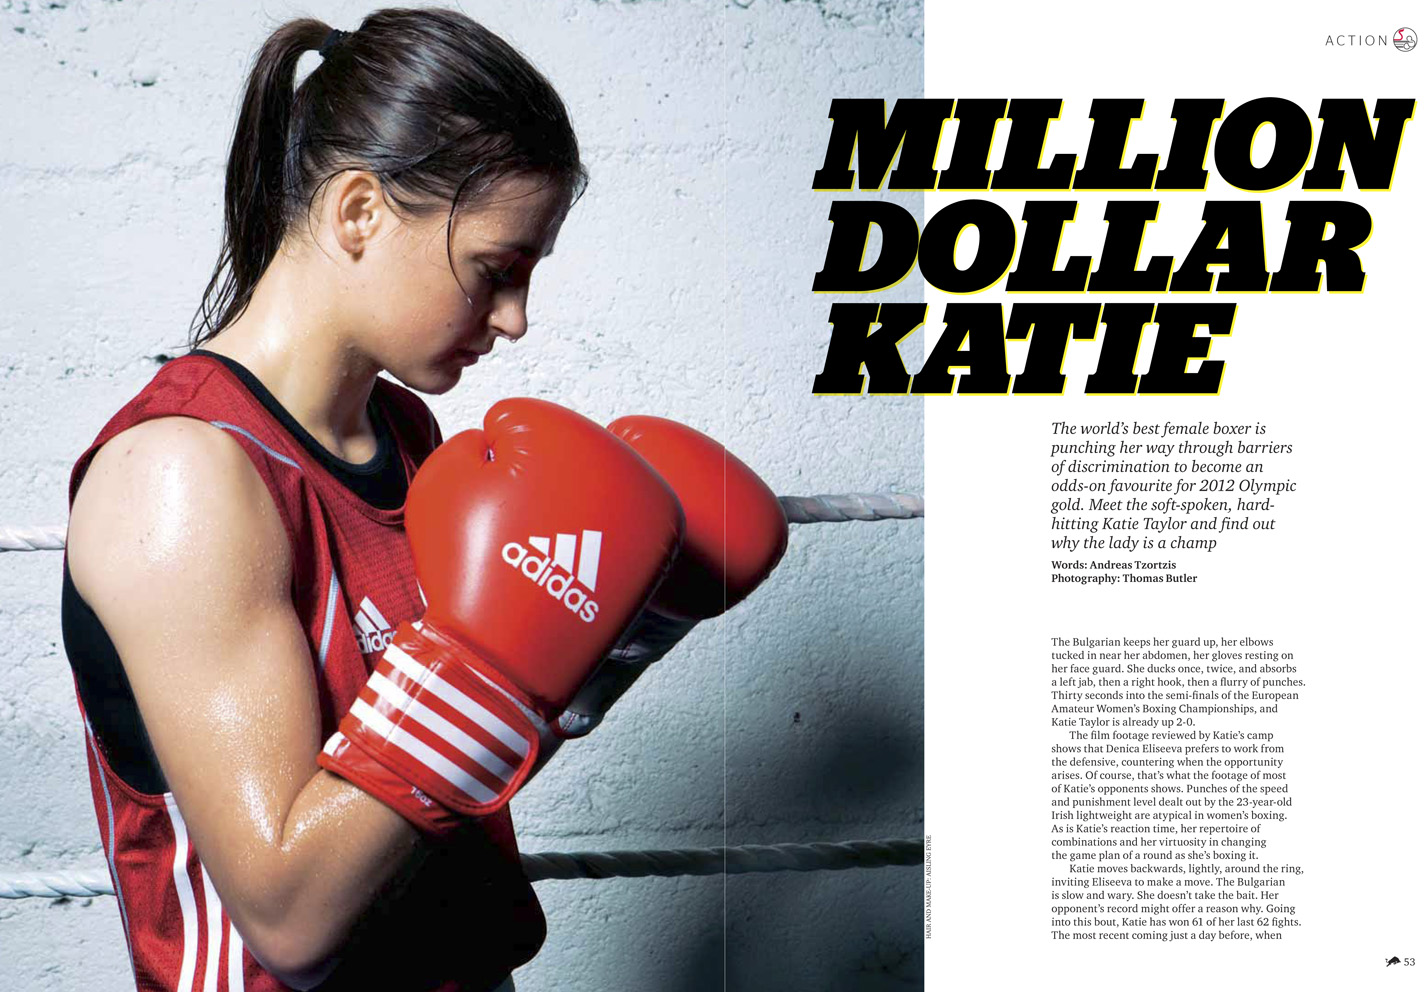 Pages from the Red Bulletin